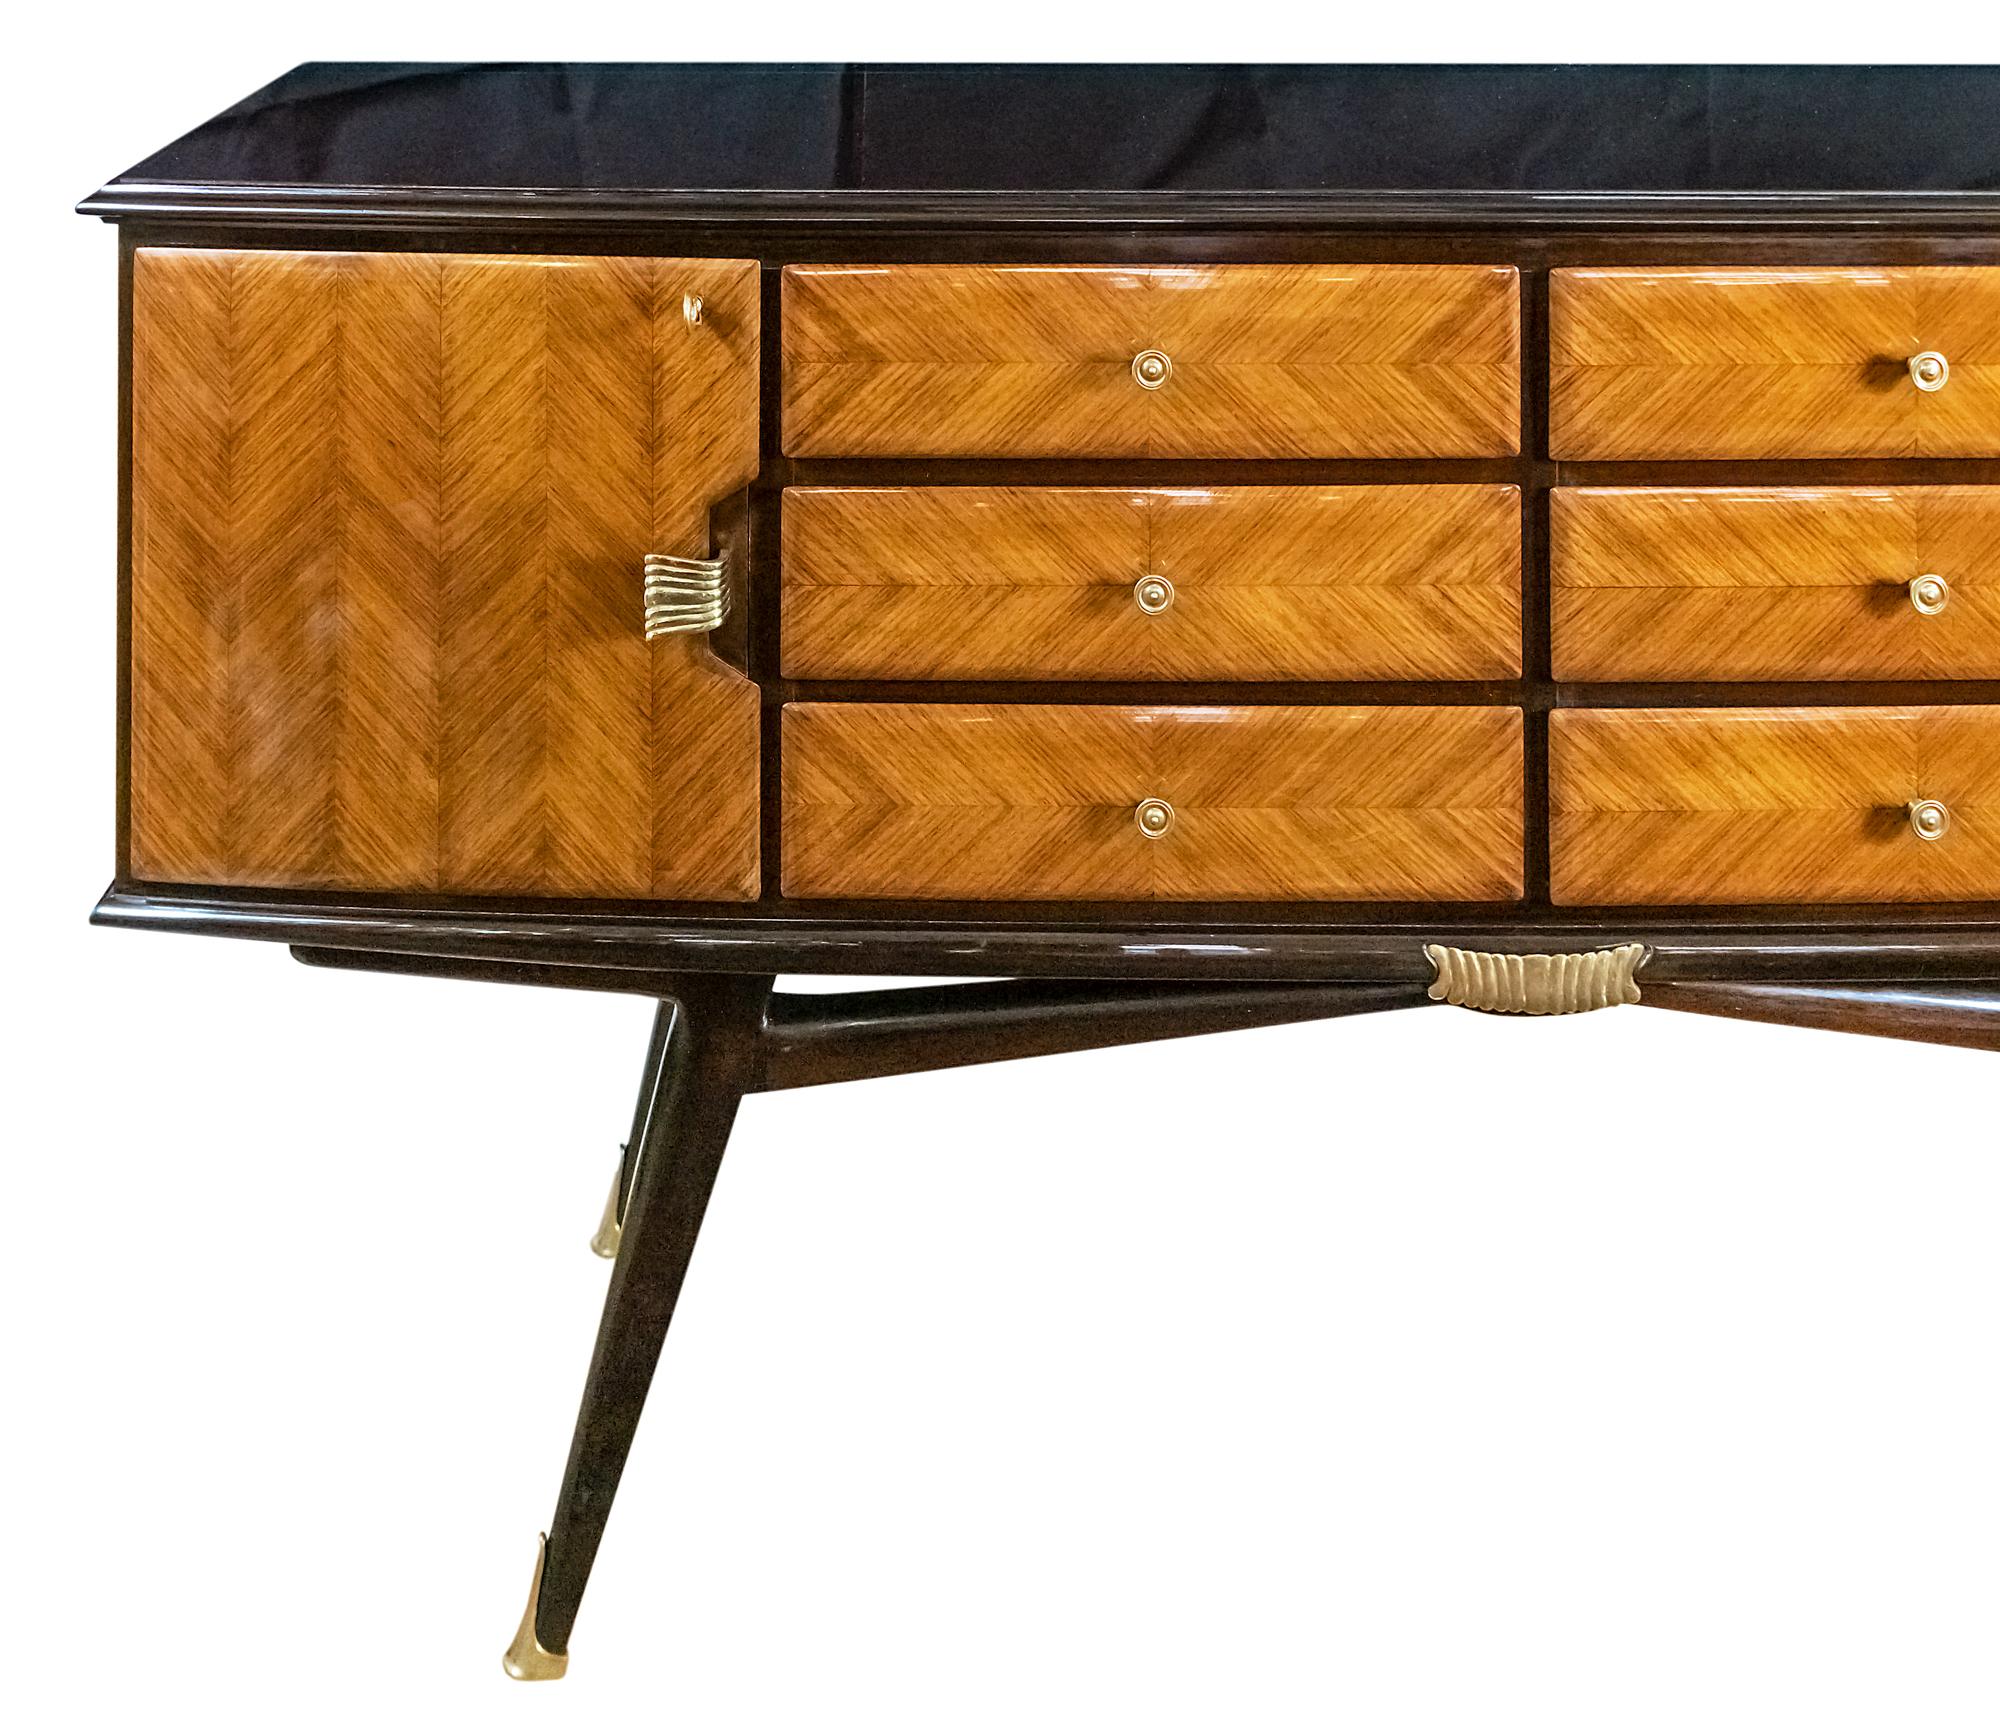 Italian vintage wood veneer sideboard from 1950s.
Wood surface is varnished, the drawers are decorated with brass handles, side doors are with keys.
Legs are with decorative brass details.
The top is glass.
Very good vintage condition, after